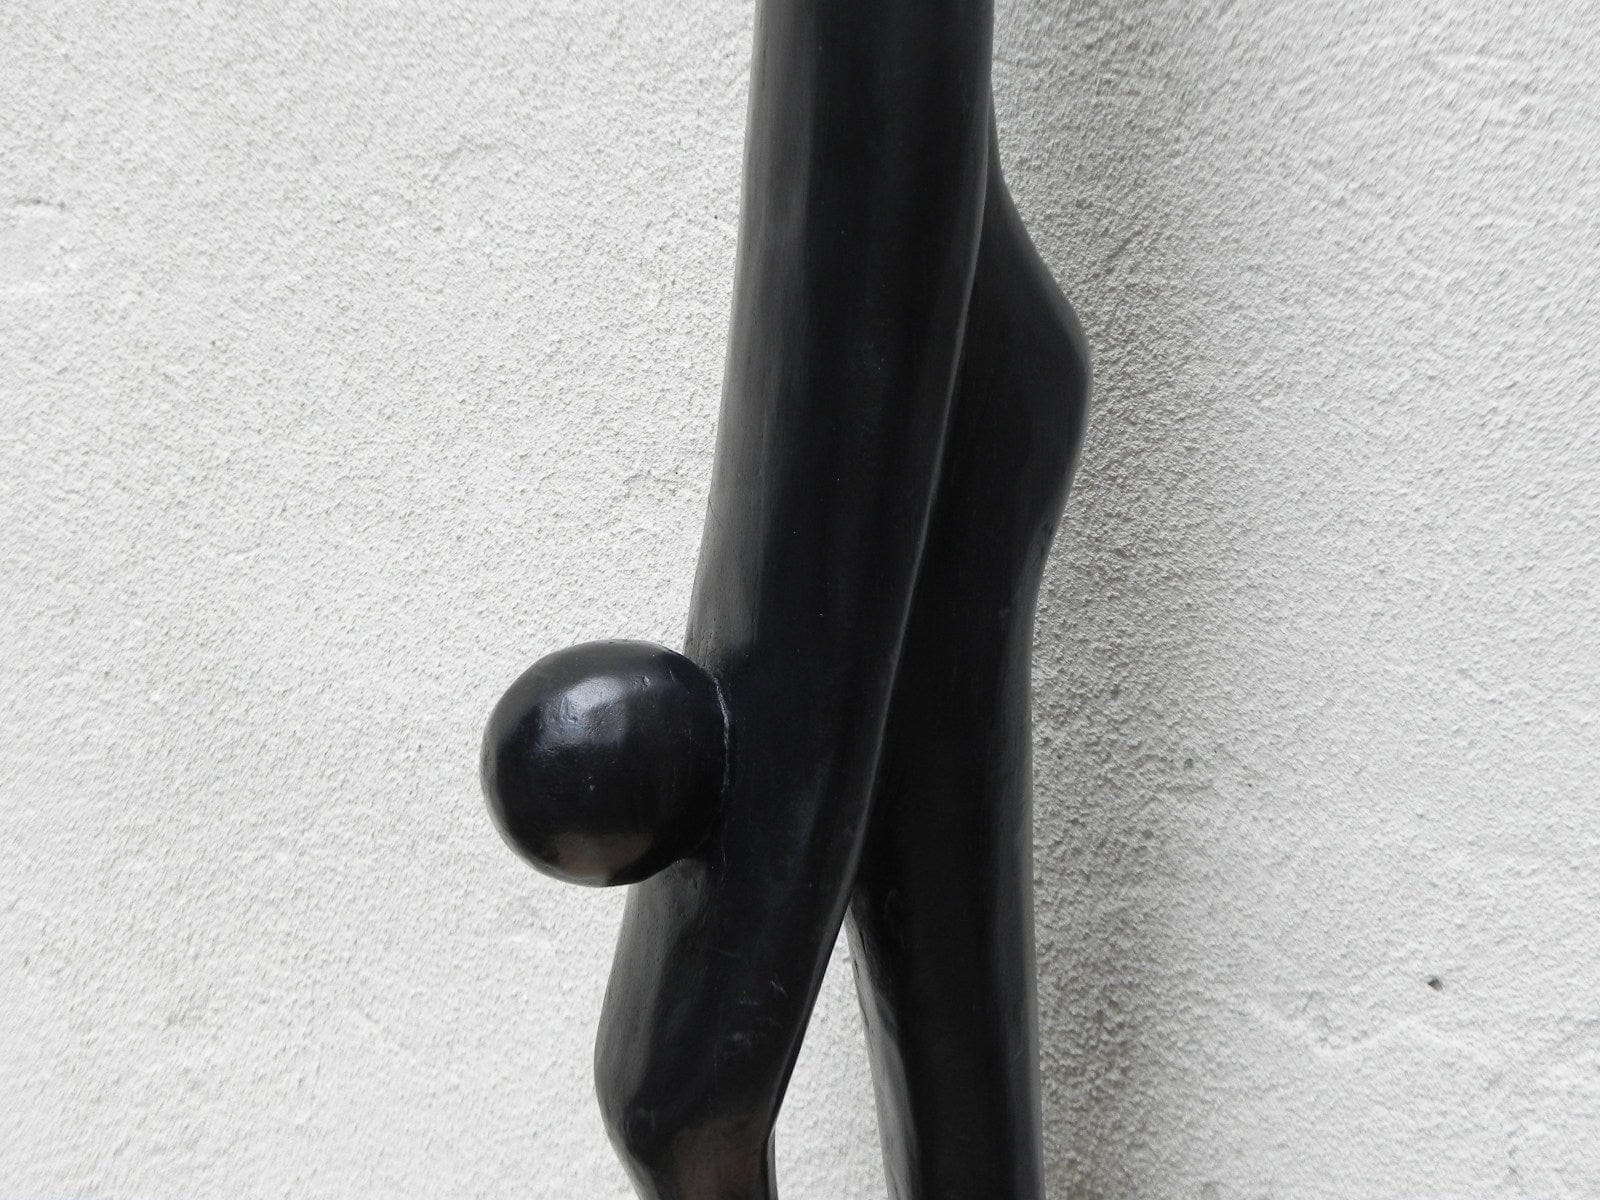 I Like Mikes Mid Century Modern Sculptures & Statues Tall Thin Black Wood Parent Child Floor Statue from Ghana